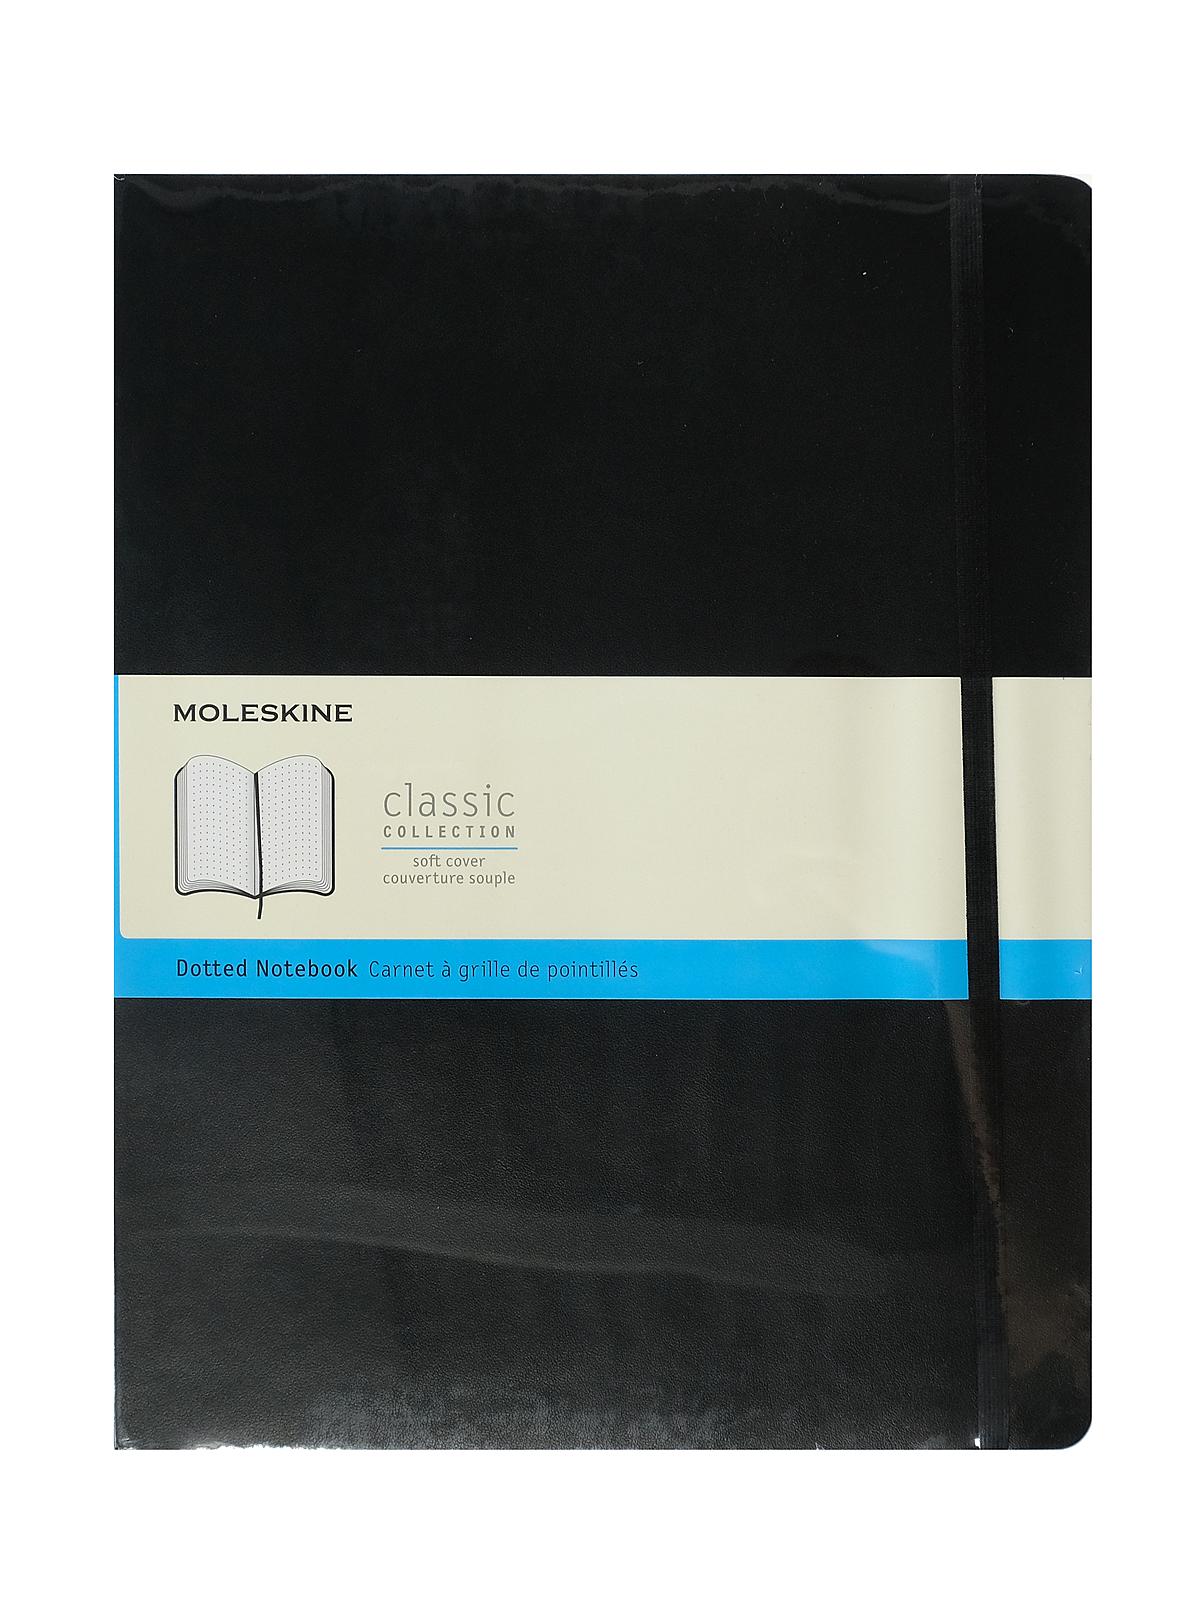 Classic Soft Cover Notebooks Black 8 1 2 In. X 11 In. 192 Pages, Dotted